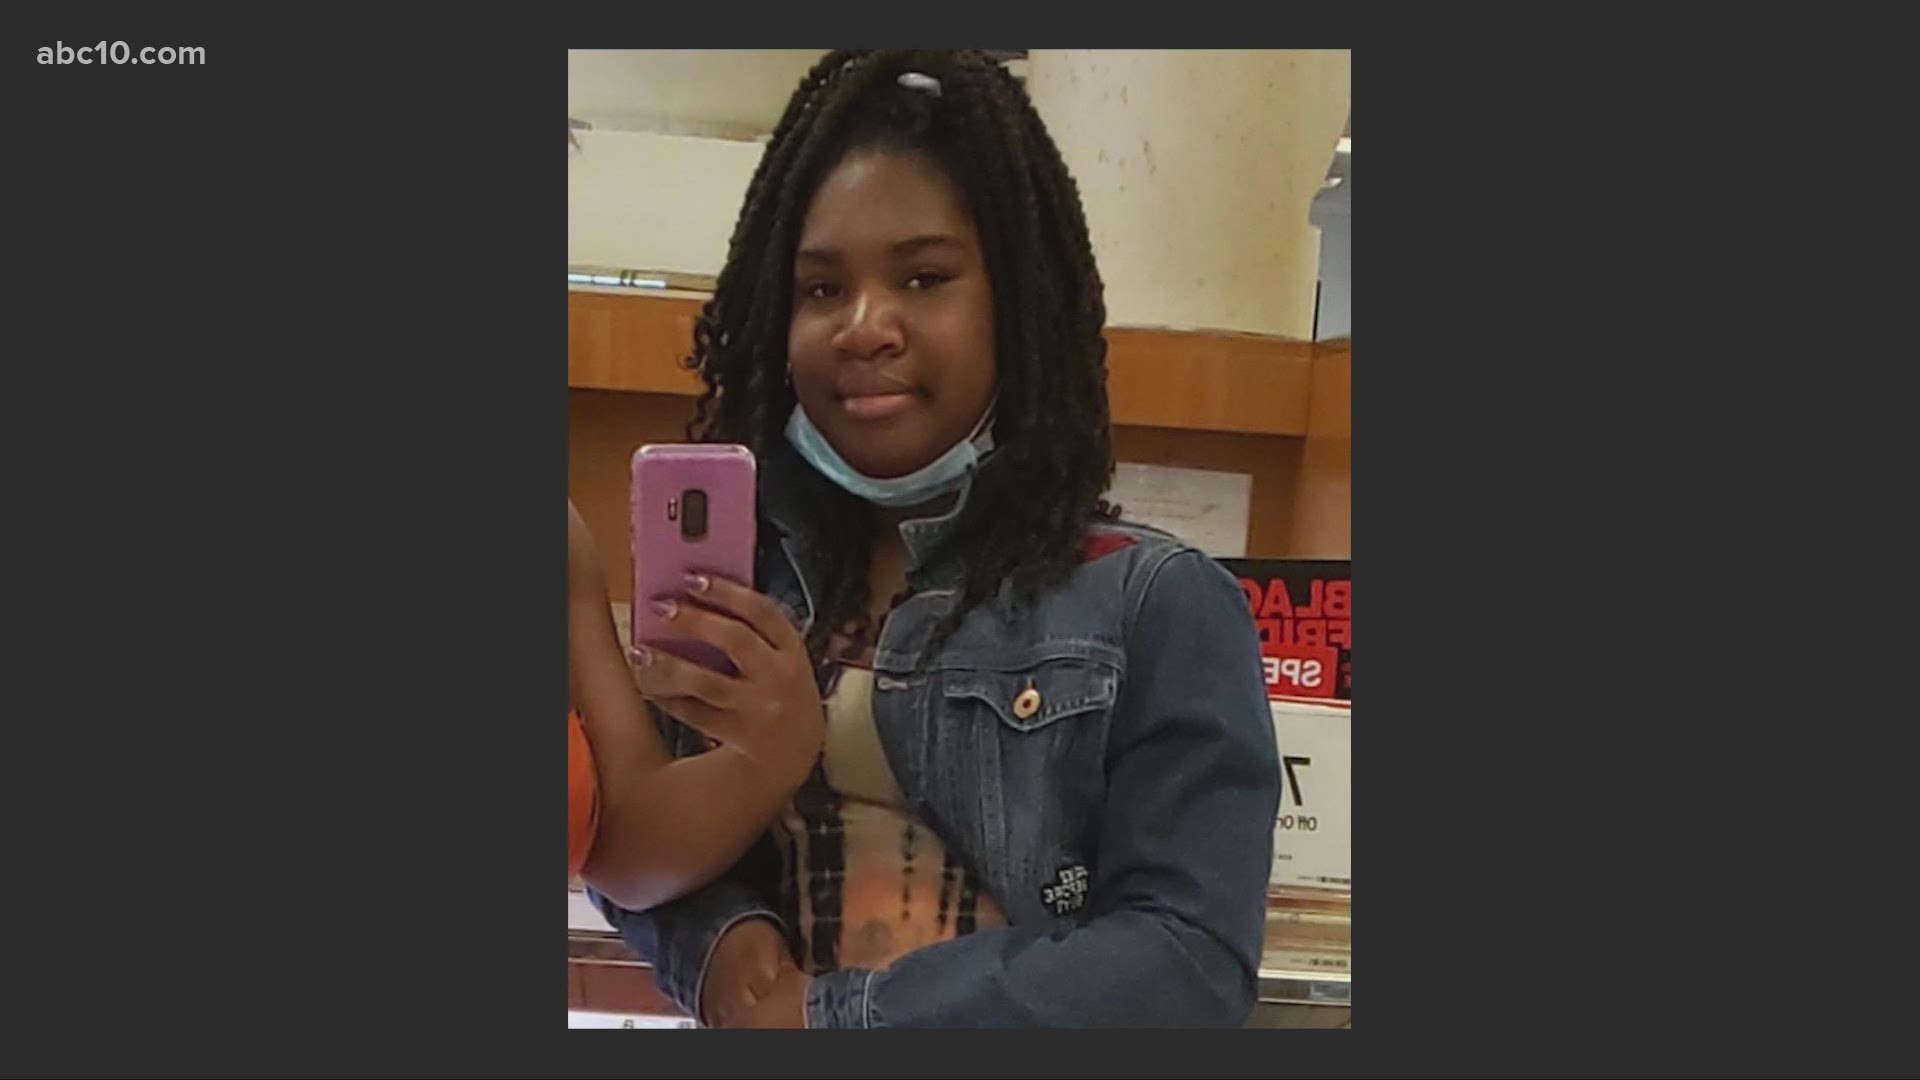 Police said Matthiya Miller was last seen on Thursday, Dec. 17. Matthiya's family says she may have gotten wrapped up with the wrong people online.